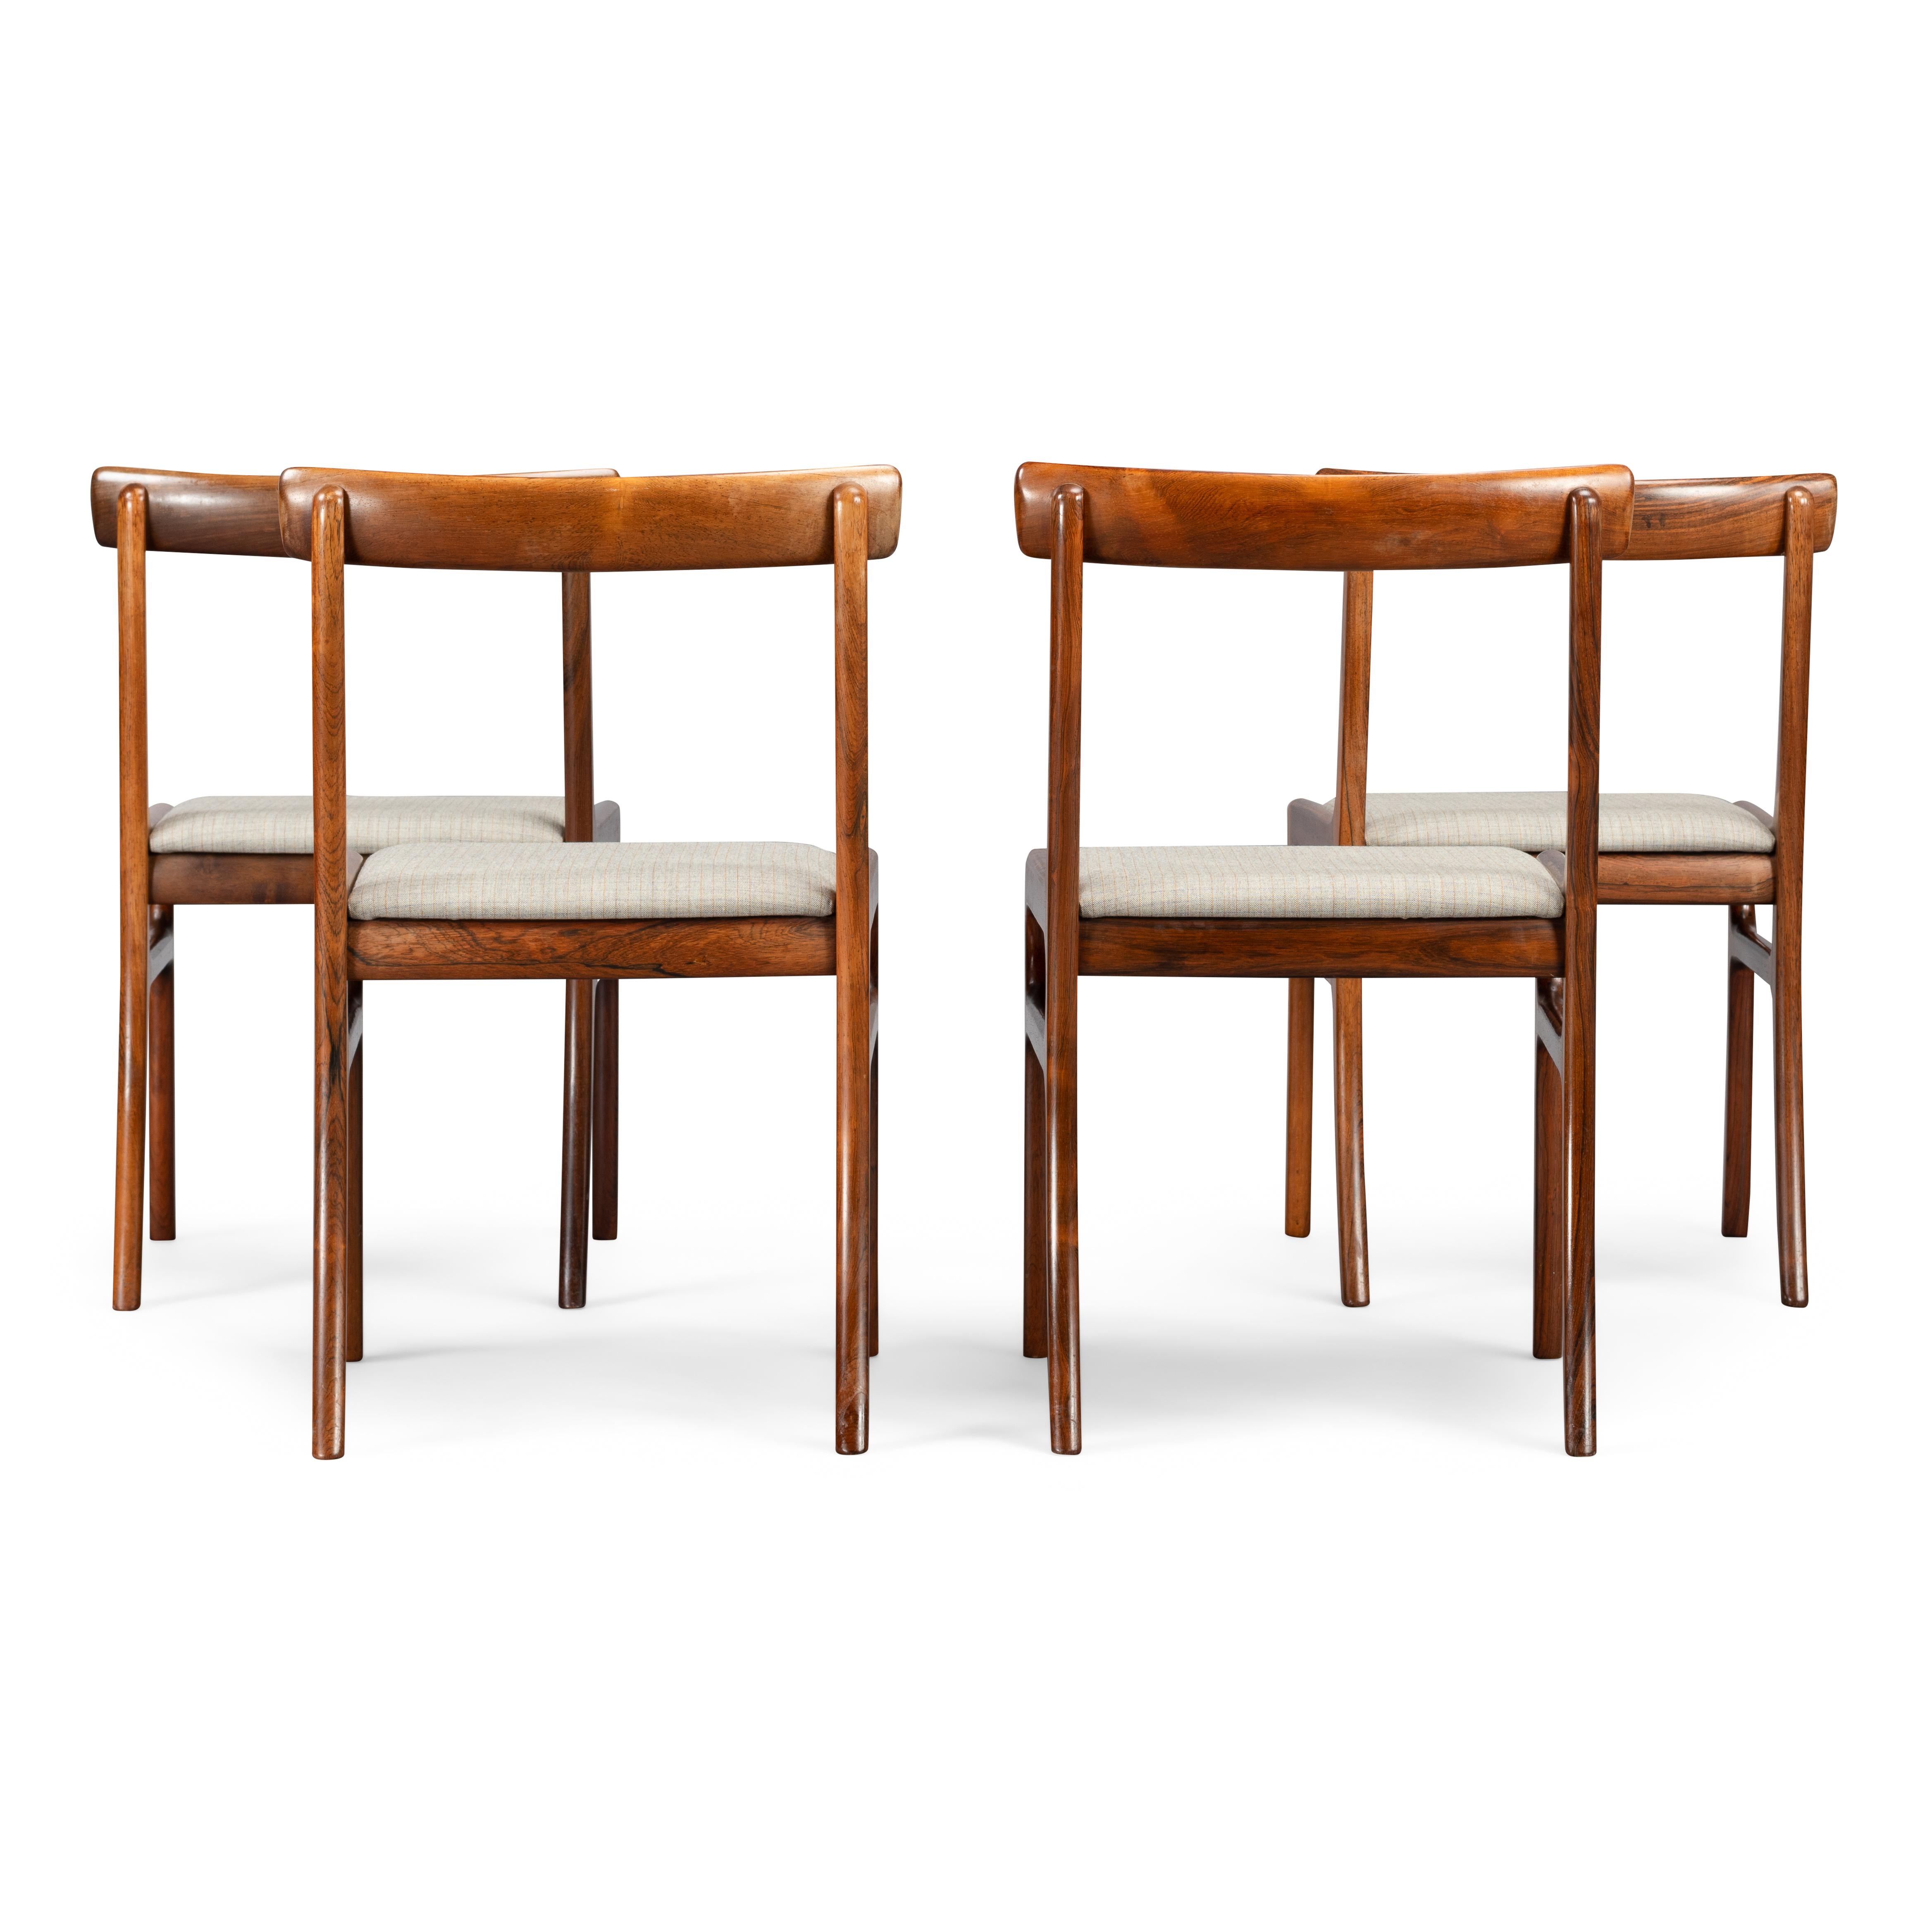 Mid-Century Modern Rosewood Rungstedlund Dining Chairs by Ole Wanscher for PJ Denmark, Set of 4